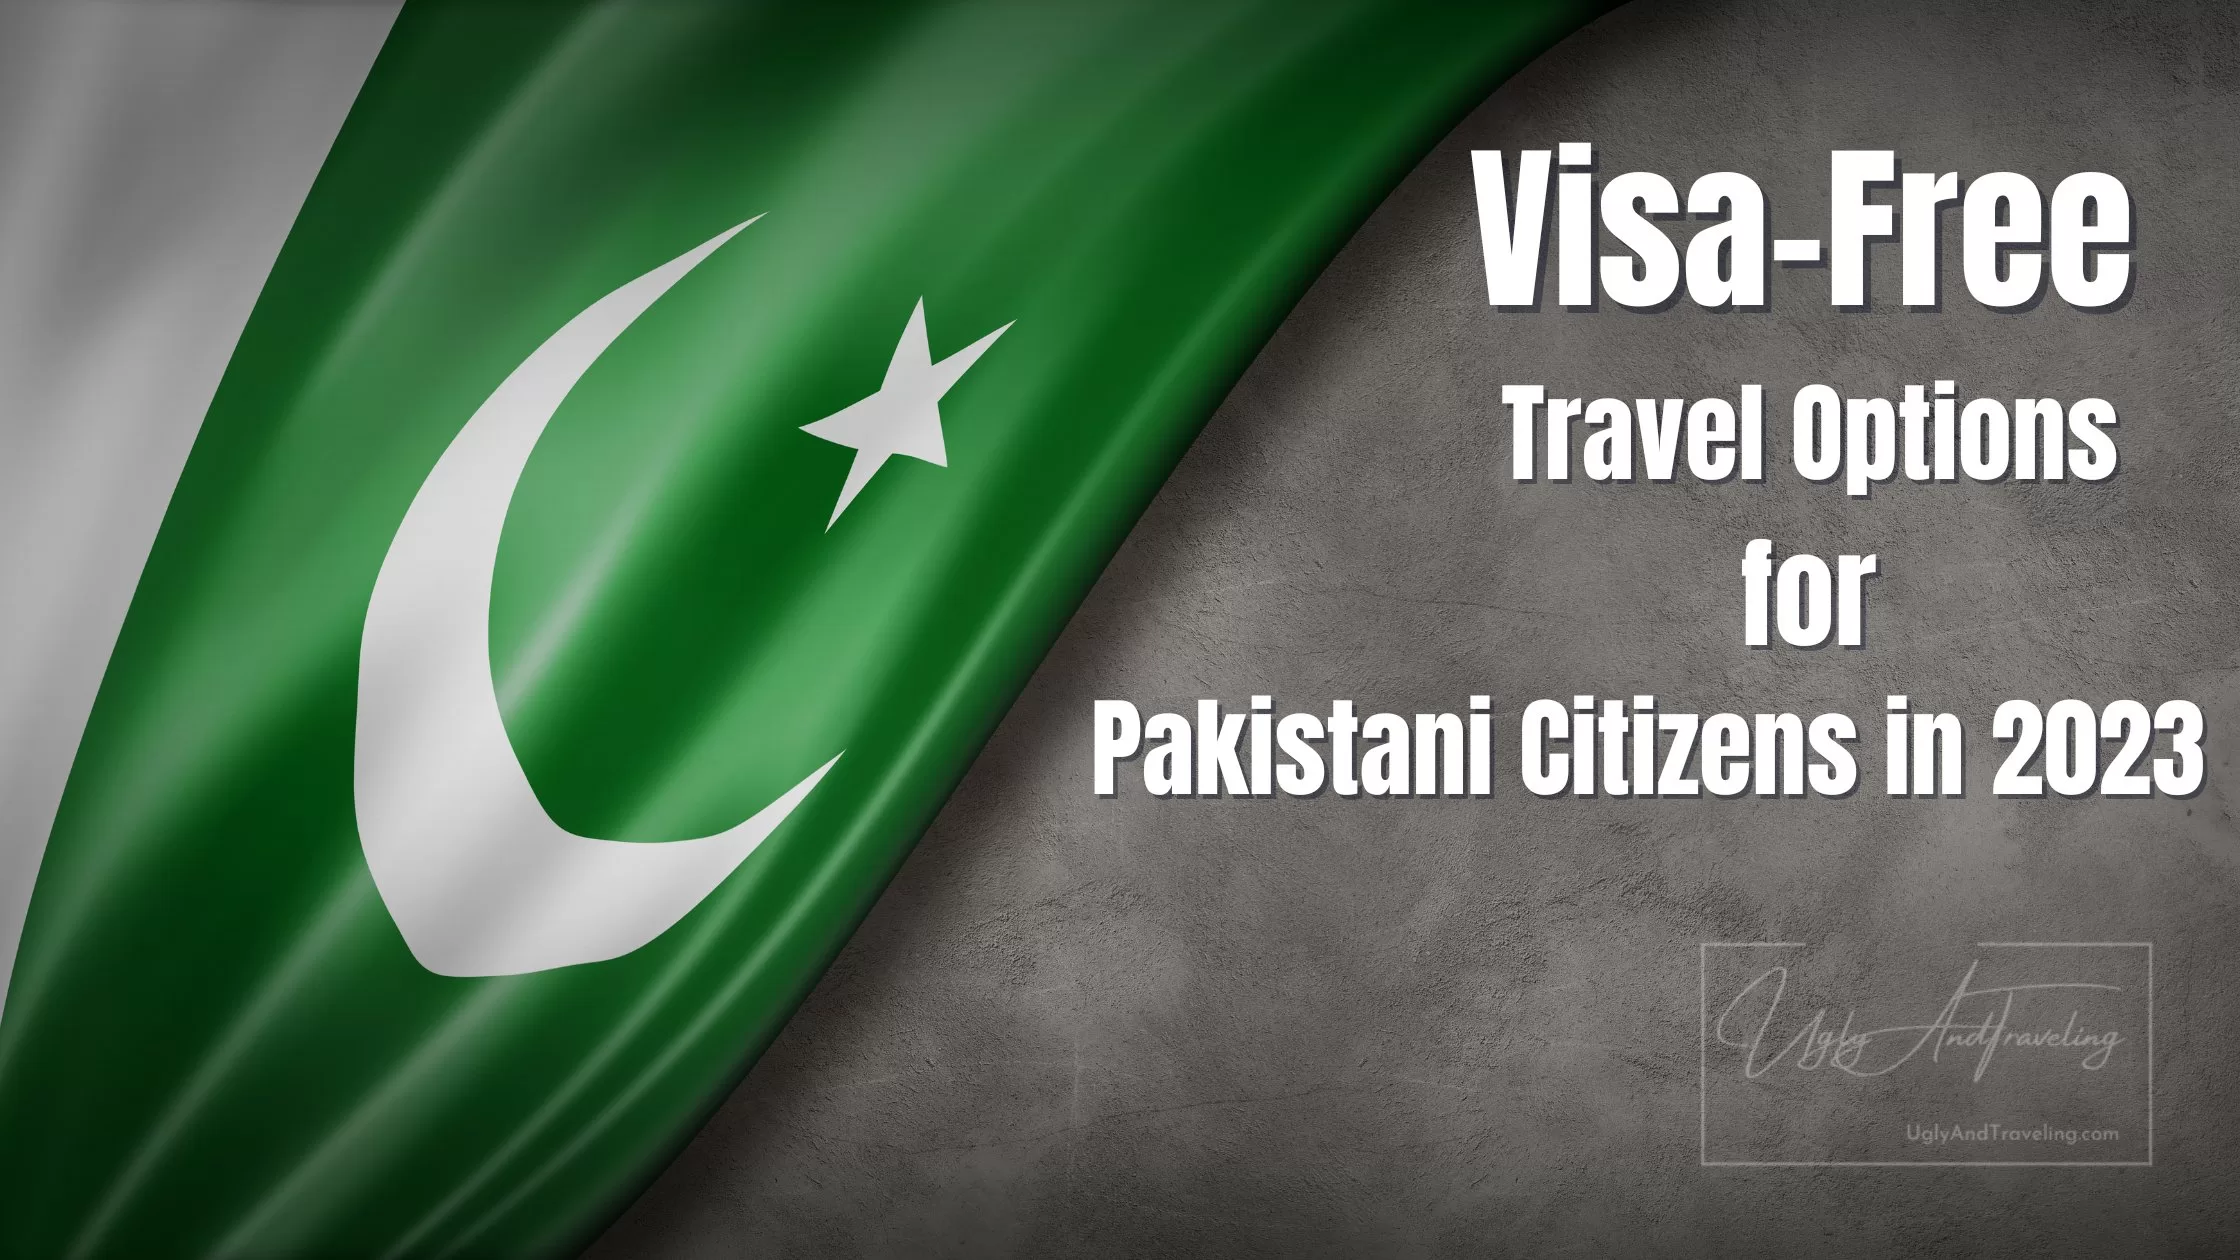 Visa-Free Travel Options for Pakistani Citizens in 2023